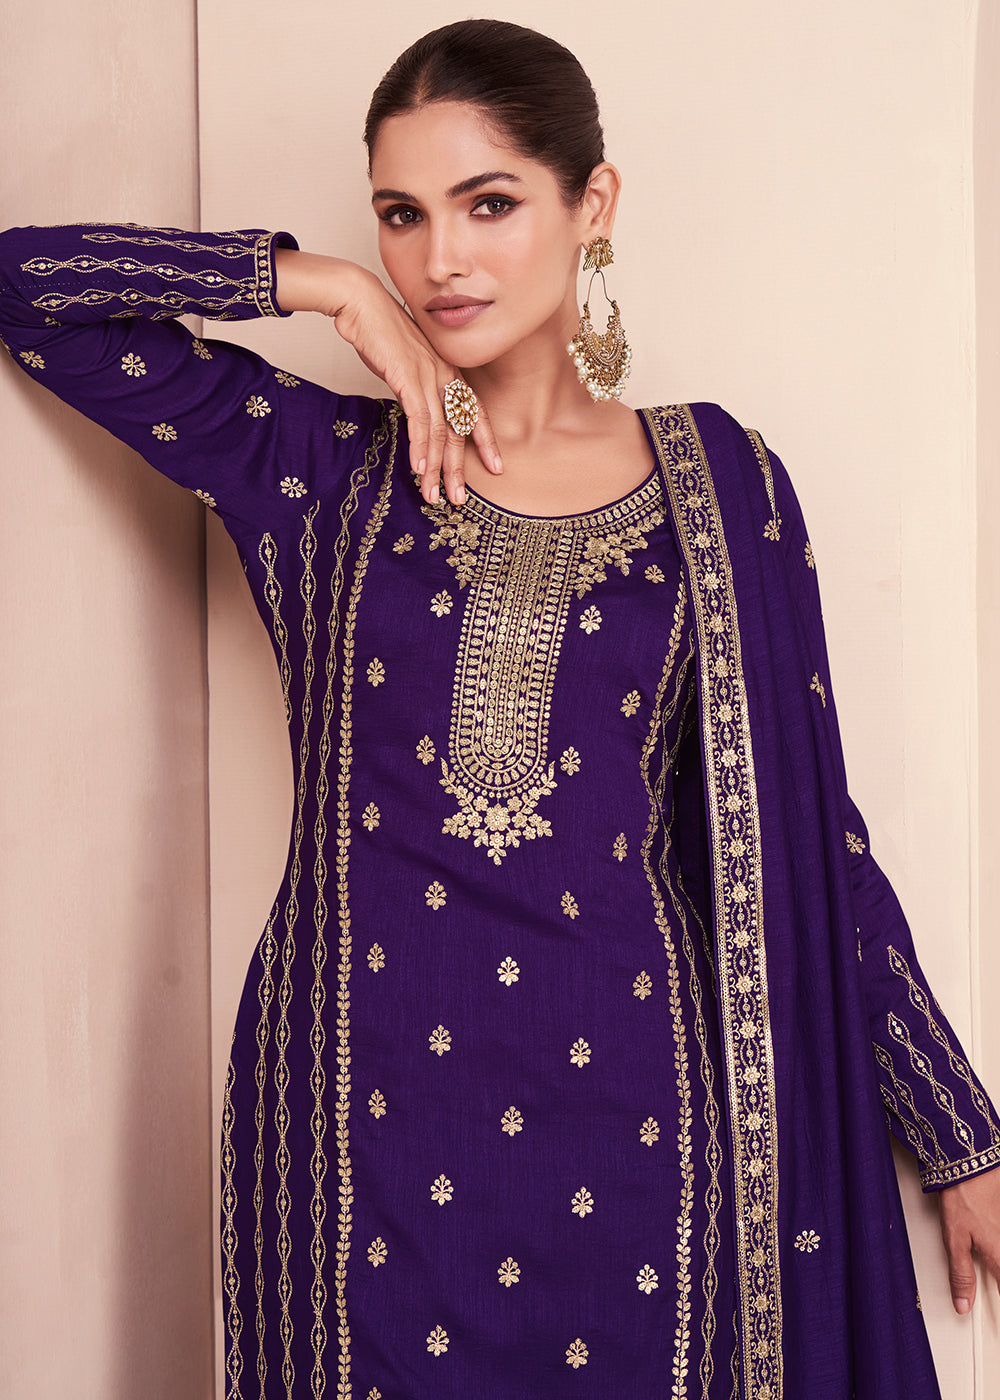 Buy Now Captivating Purple Zari Embroidered Palazzo Salwar Suit Online in USA, UK, Canada, Germany, Australia & Worldwide at Empress Clothing